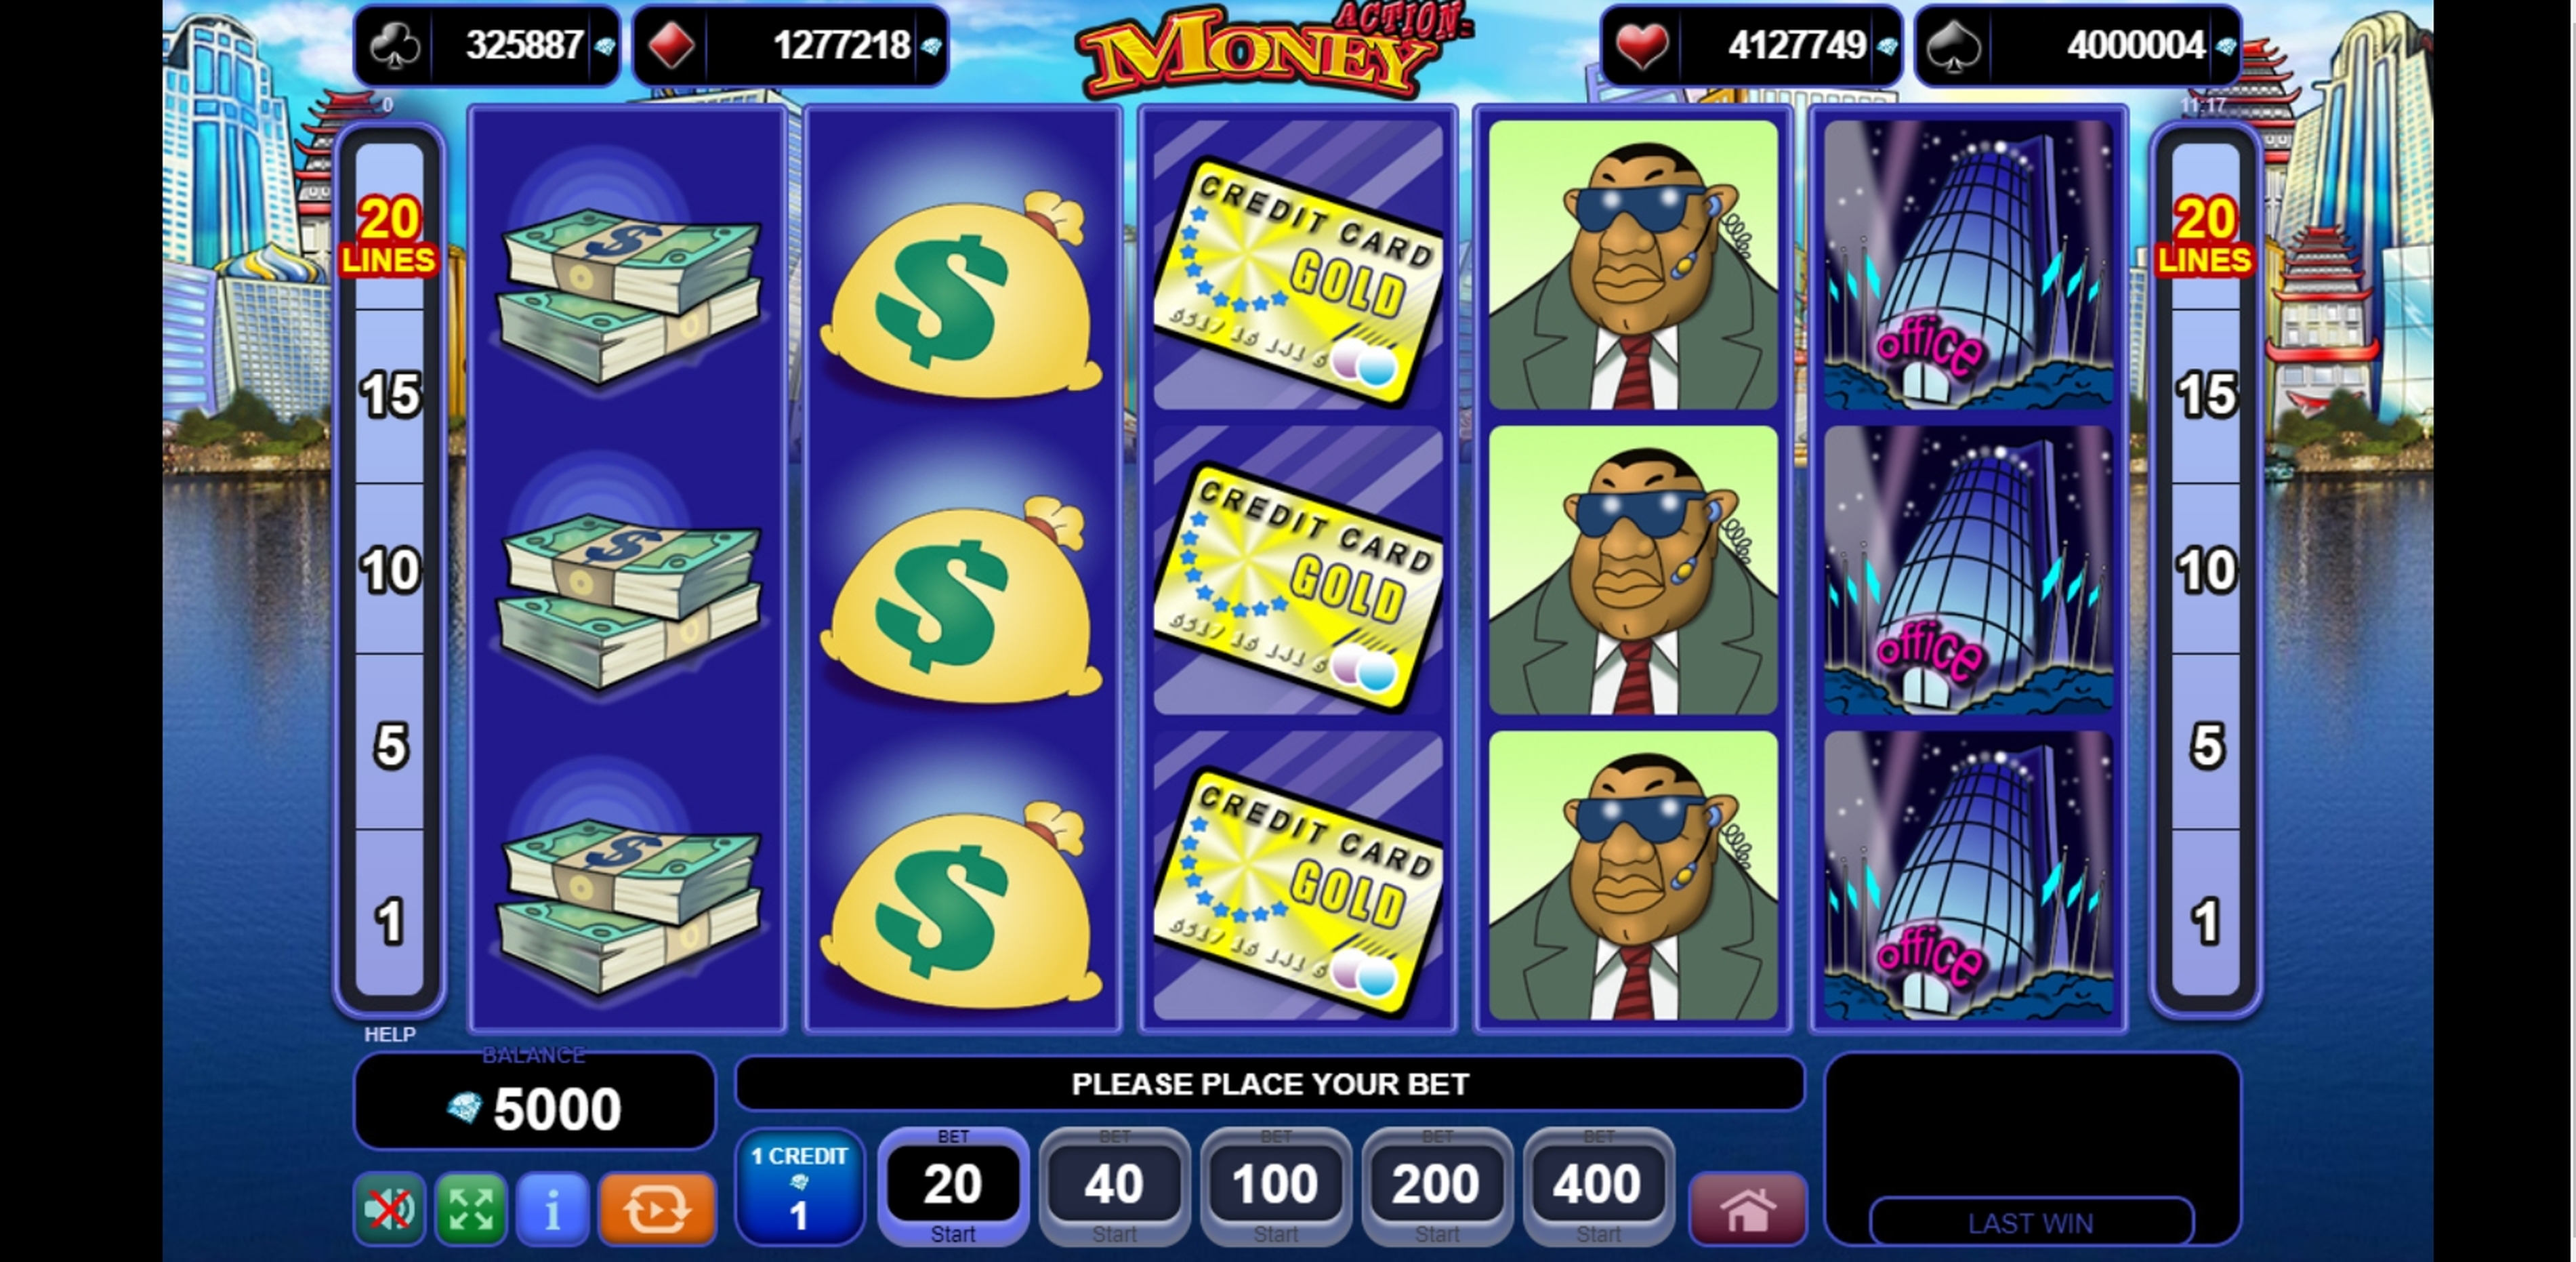 Reels in Action Money Slot Game by EGT